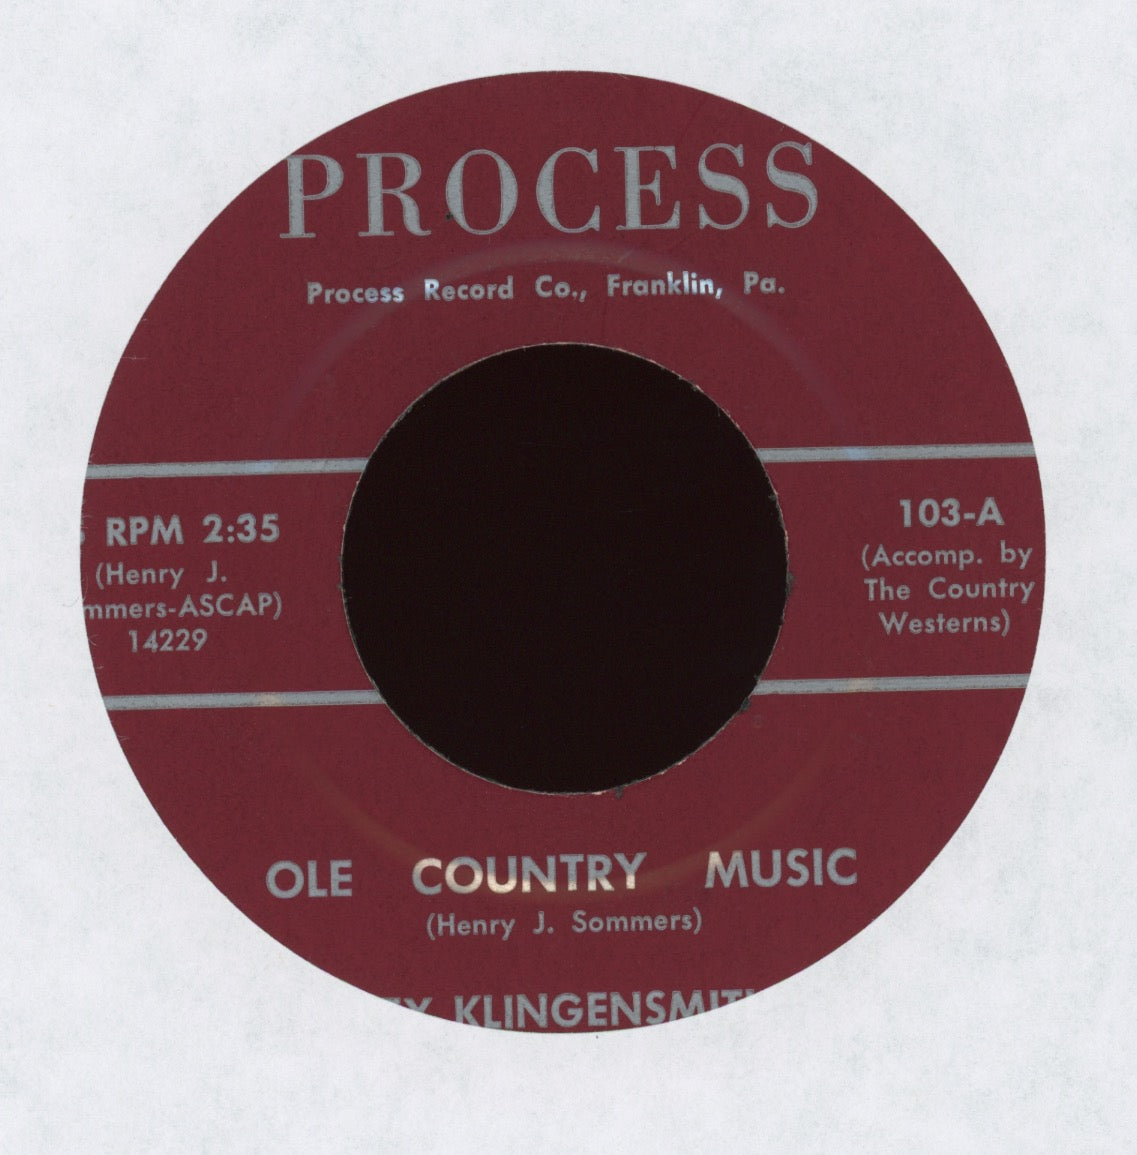 Rex Klingensmith - Ole Country Music on Process